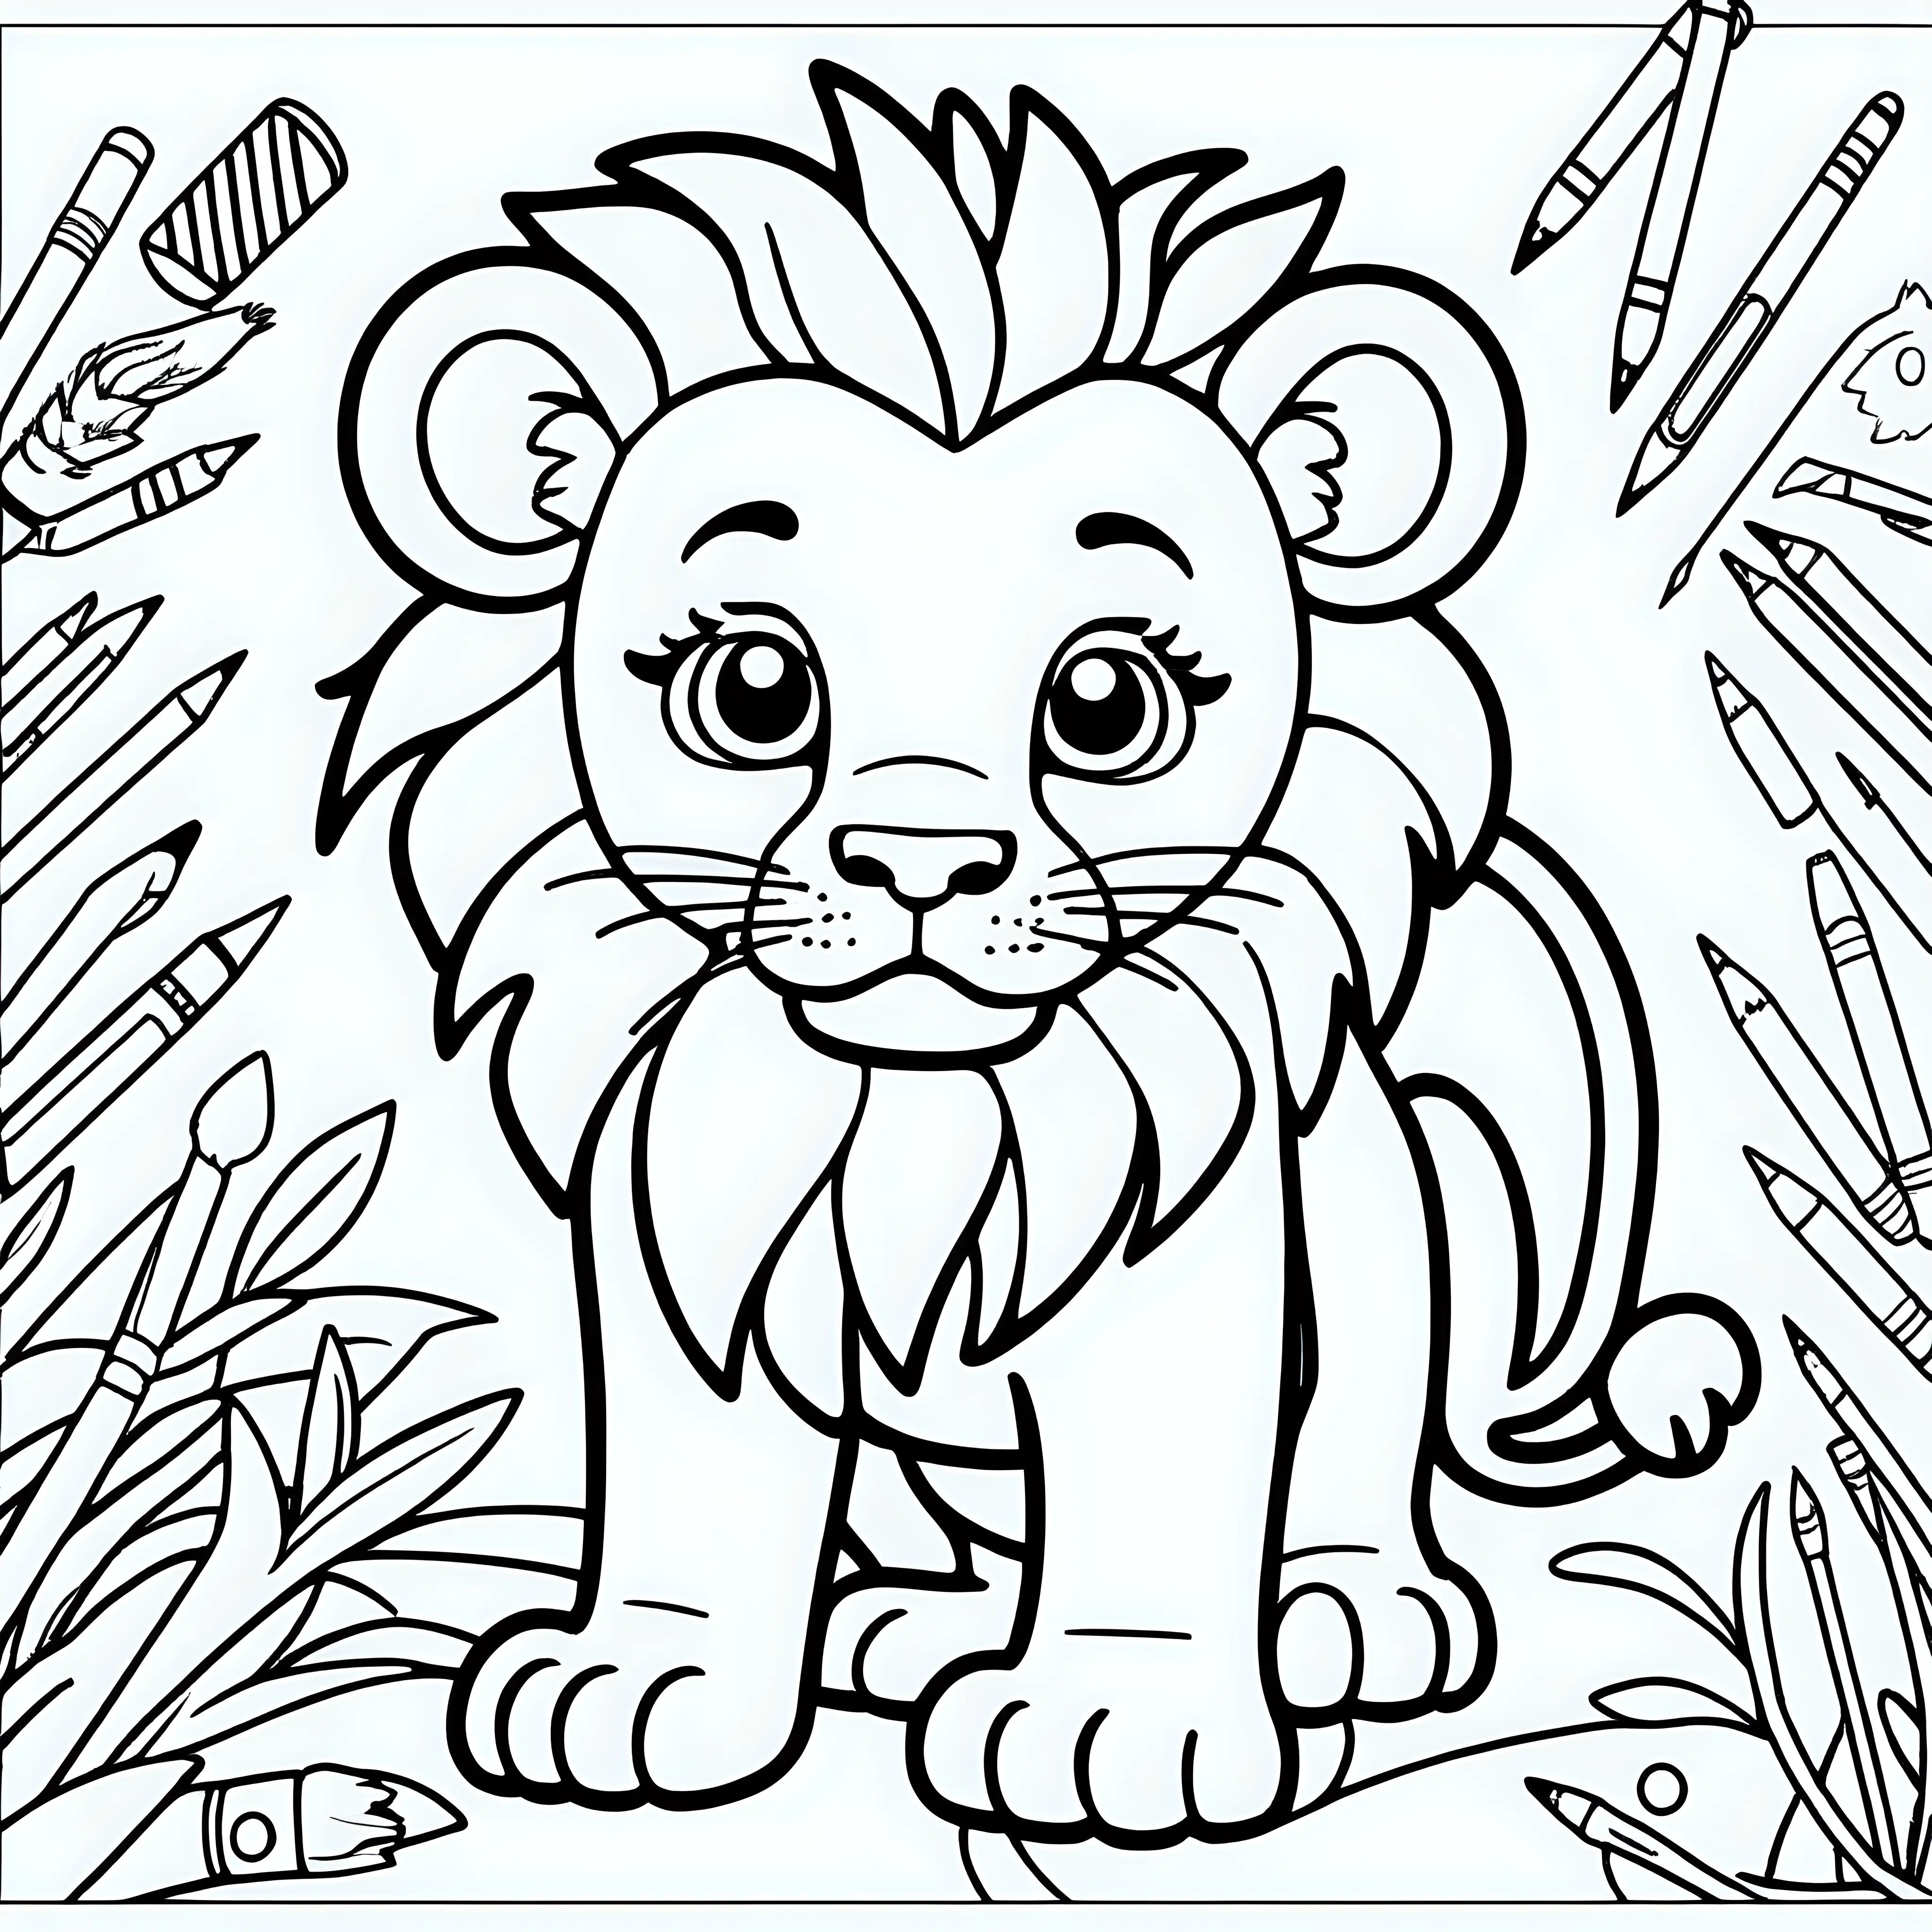 kids colouring page, low detail, no shading, thick lines, cute lion, cartoon style, no background,